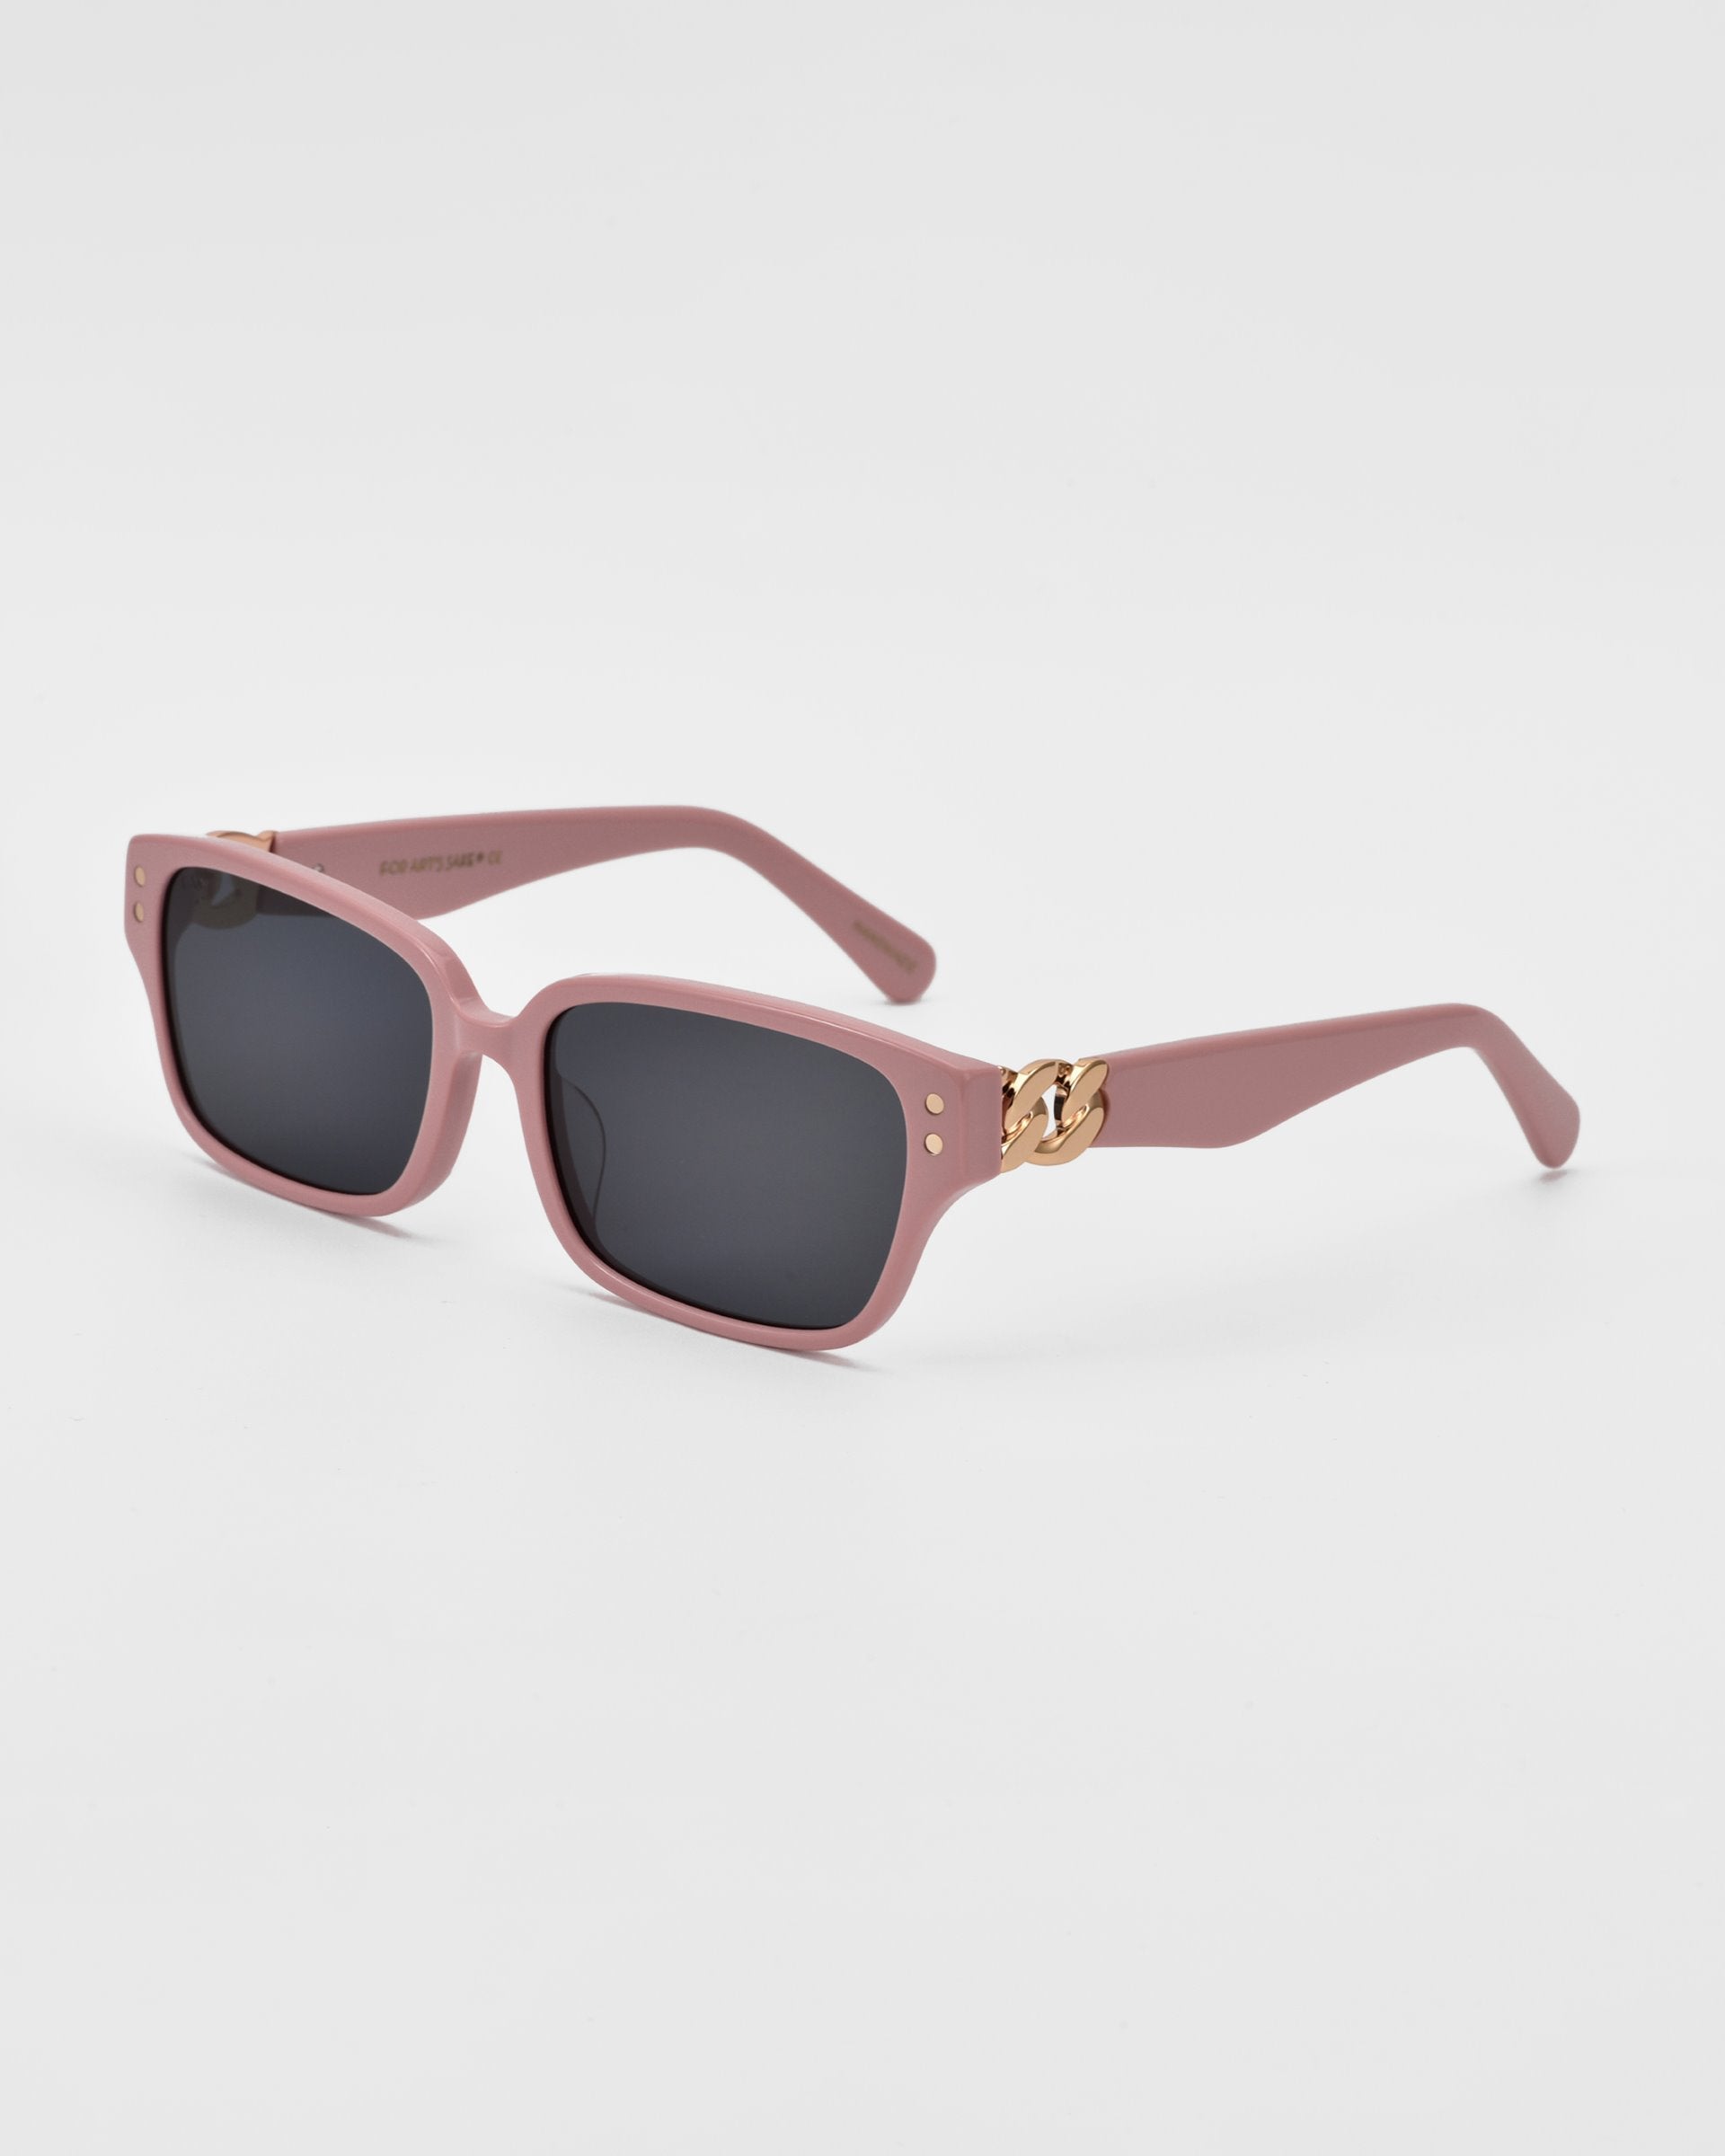 The For Art's Sake® Zenith sunglasses are a pair of pink rectangular sunglasses with dark lenses. Handcrafted from acetate, the frames feature a small, chunky chain detailing in gold on both sides near the temples, adding a decorative element against the white background.